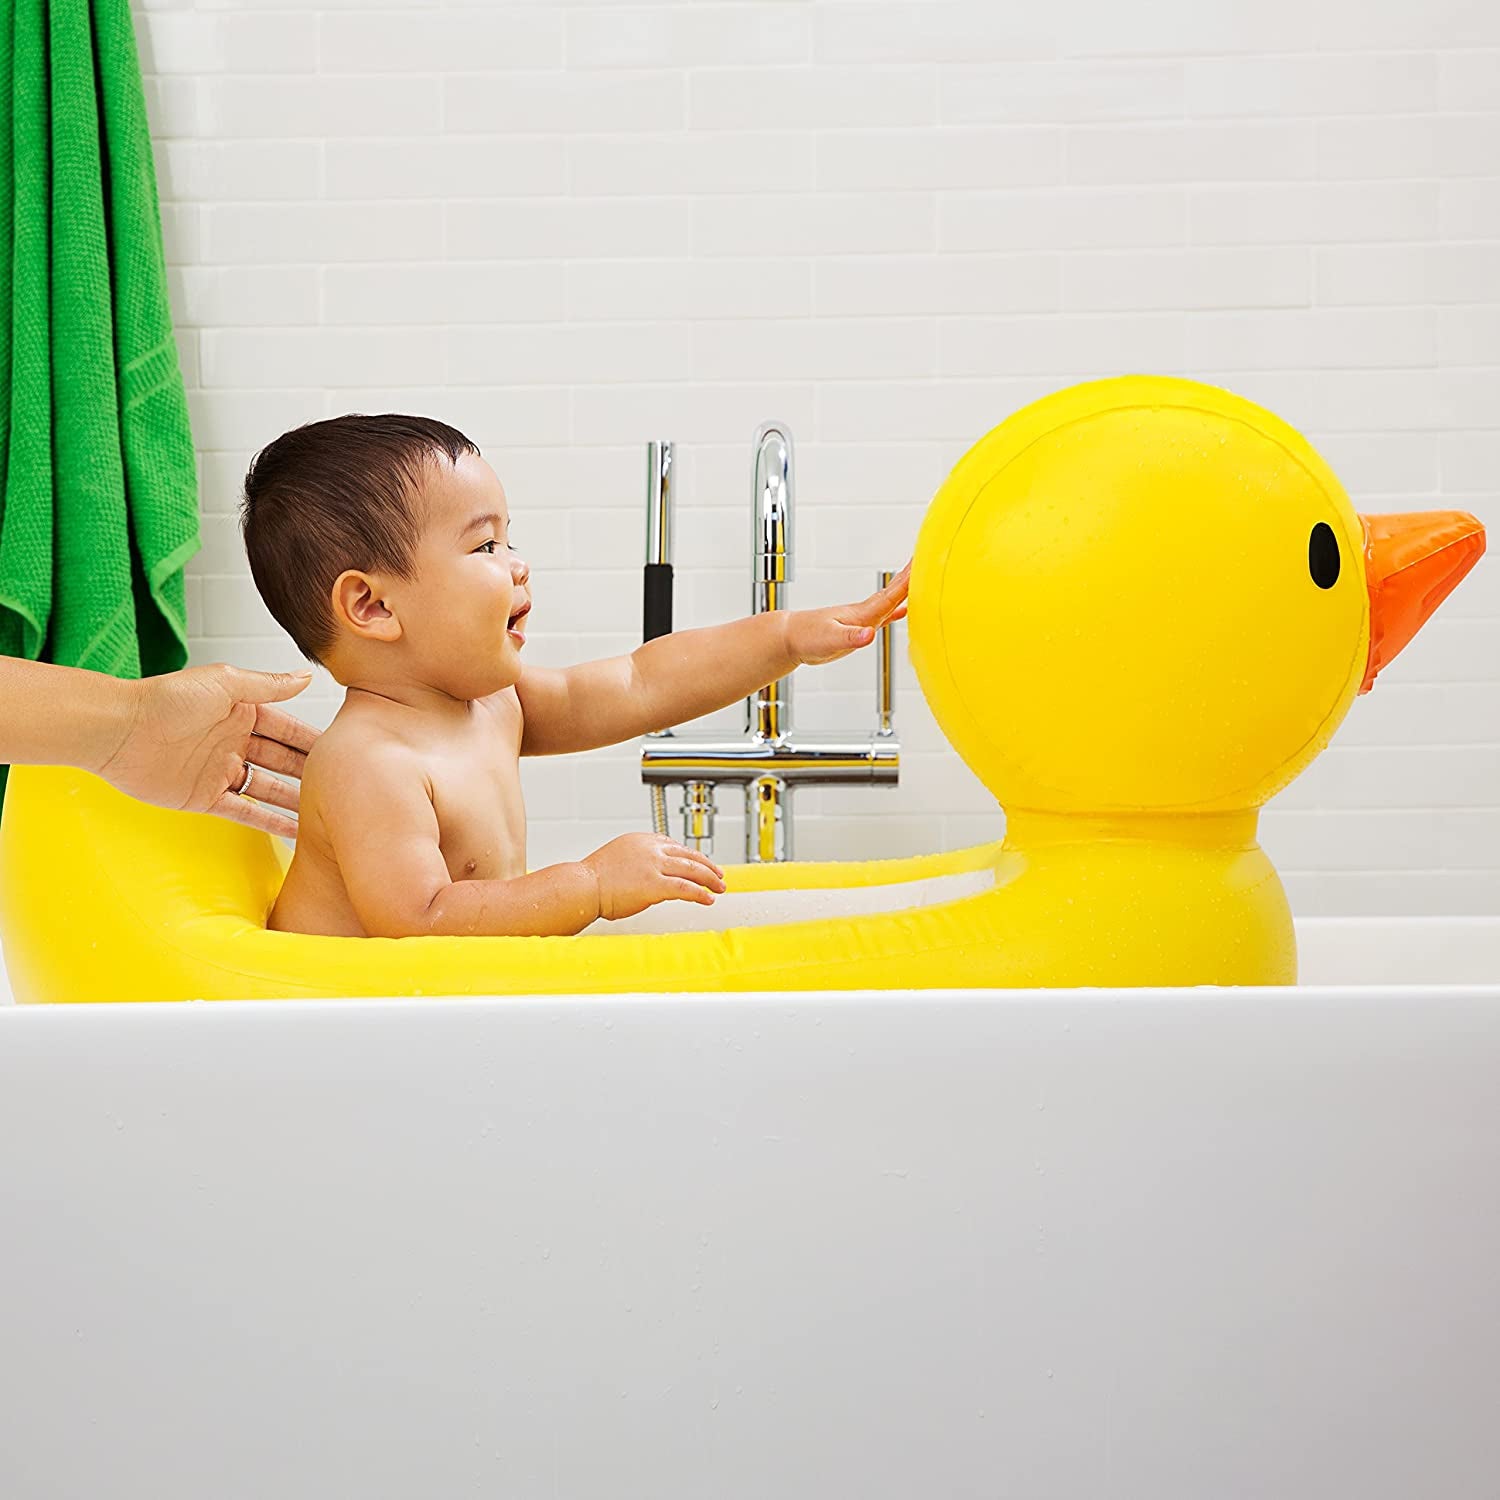 Munchkin Inflatable Safety Duck Tub